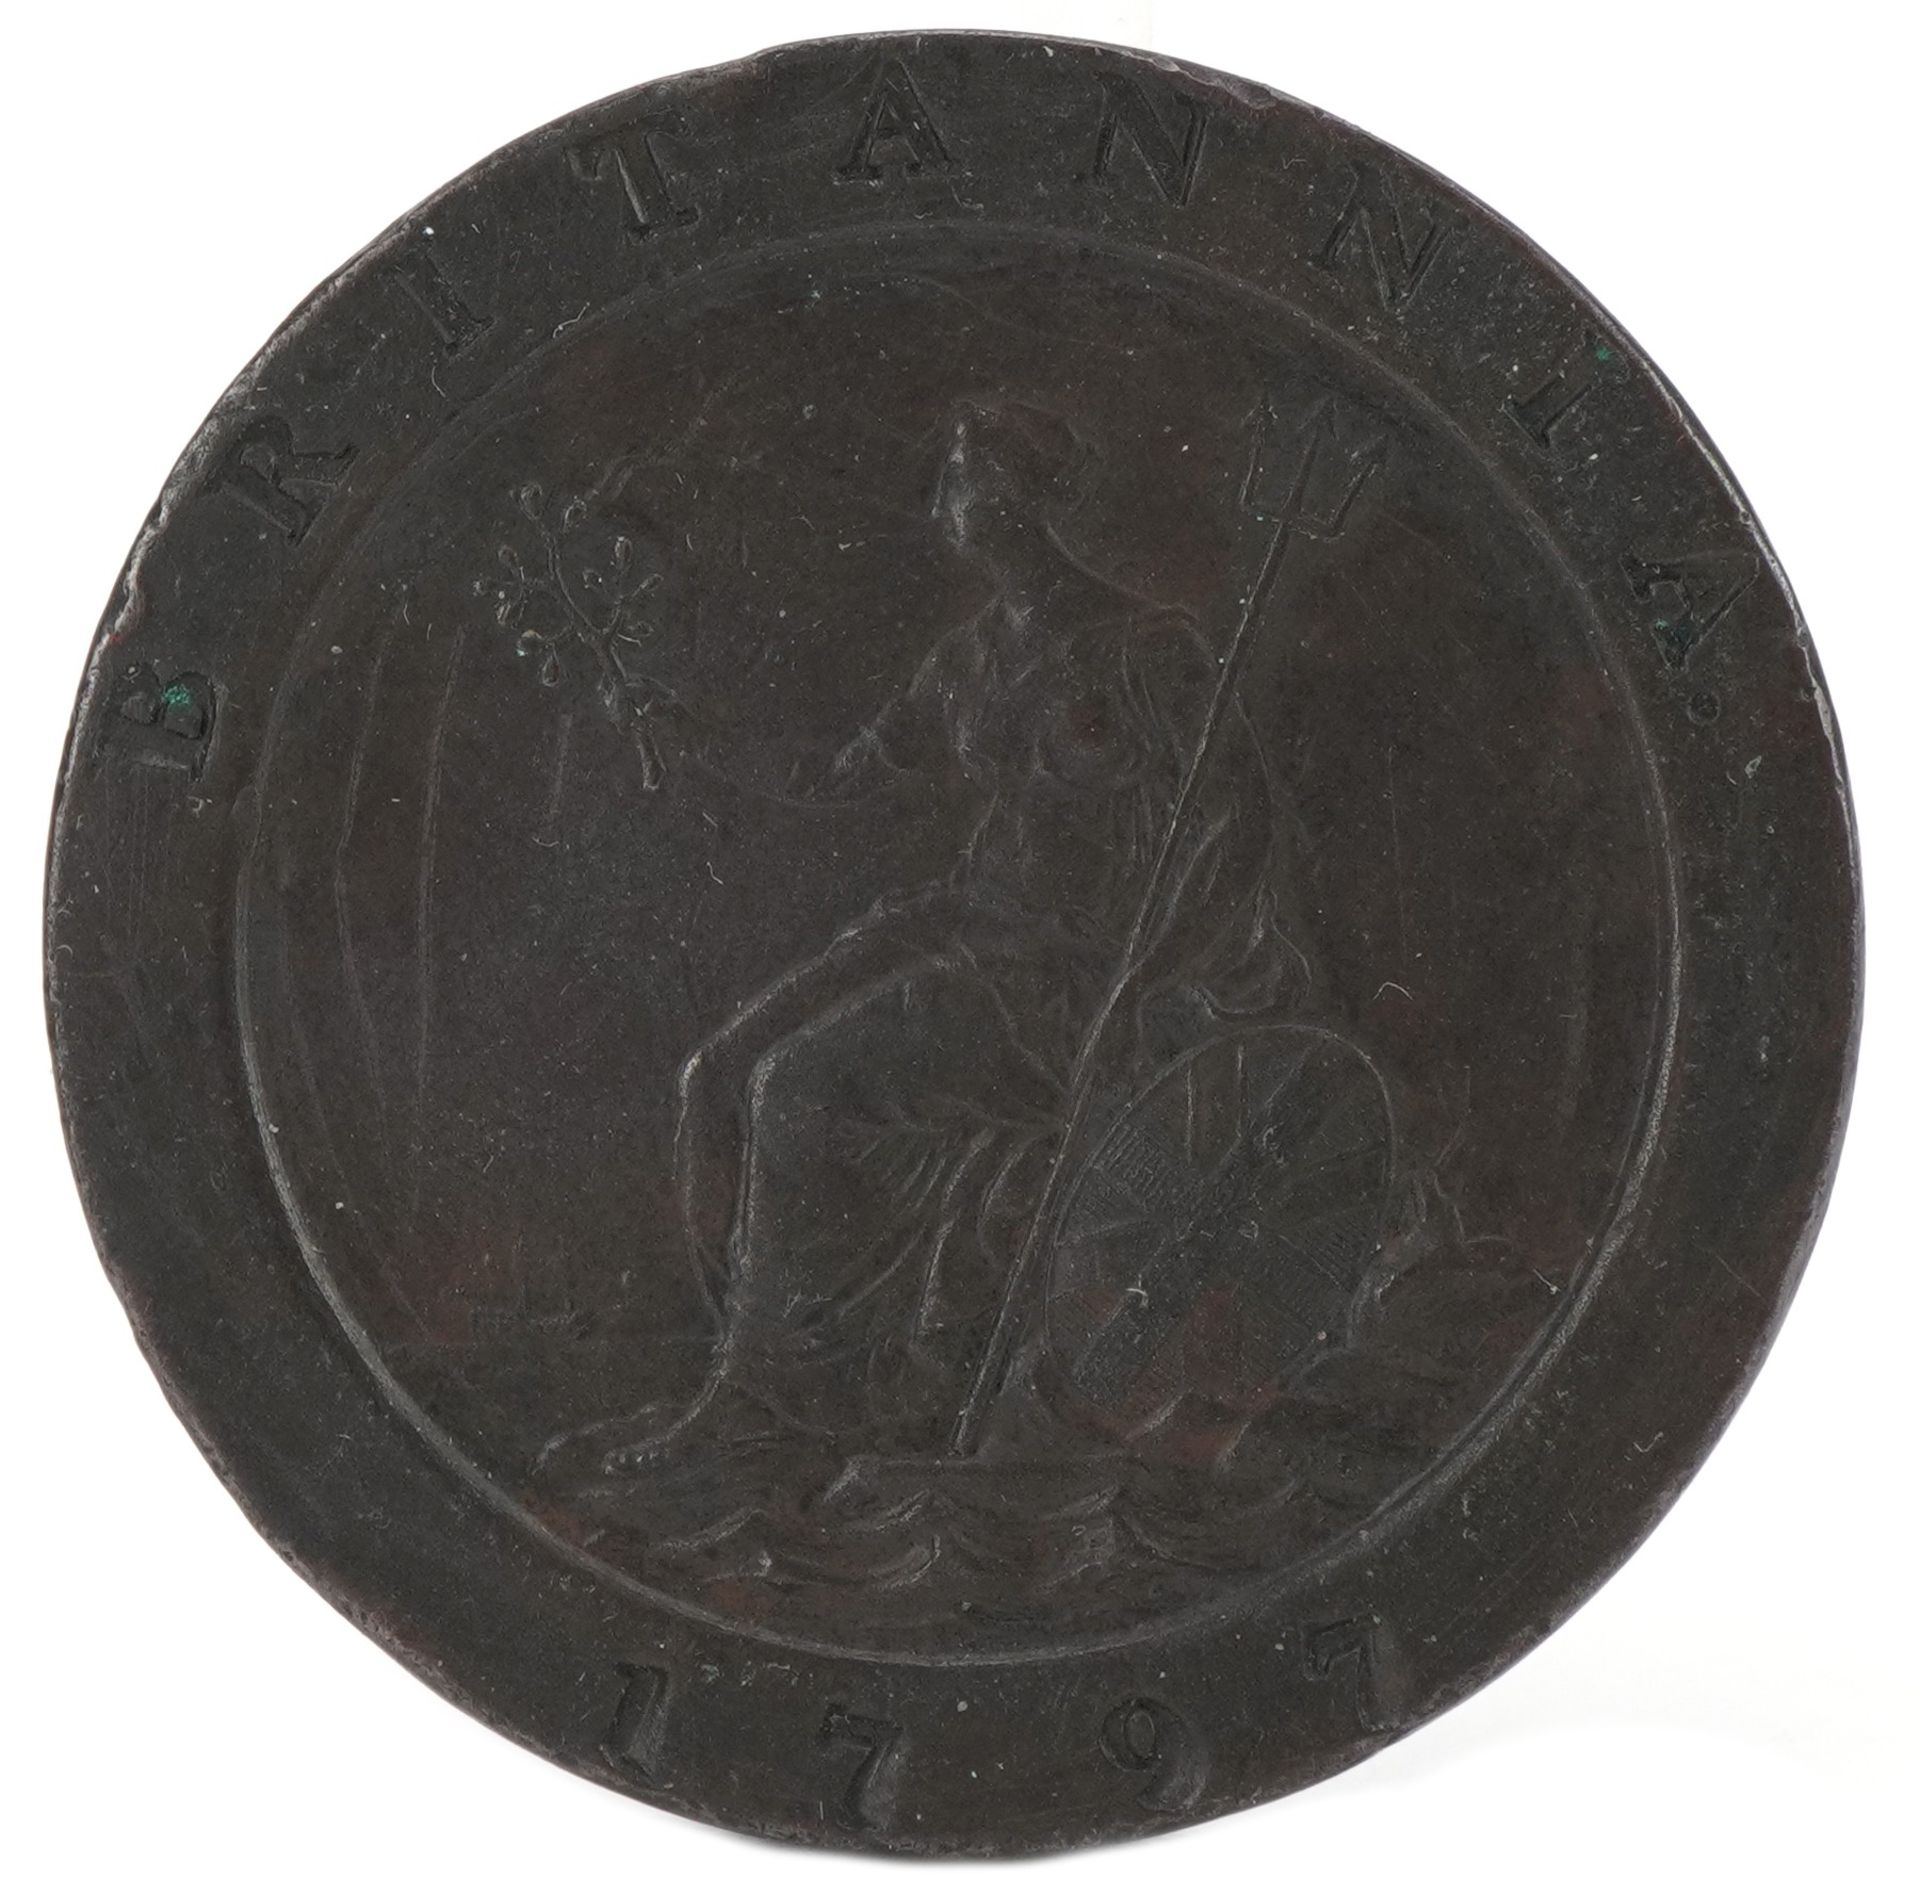 George III 1797 copper Cartwheel penny : For further information on this lot please visit